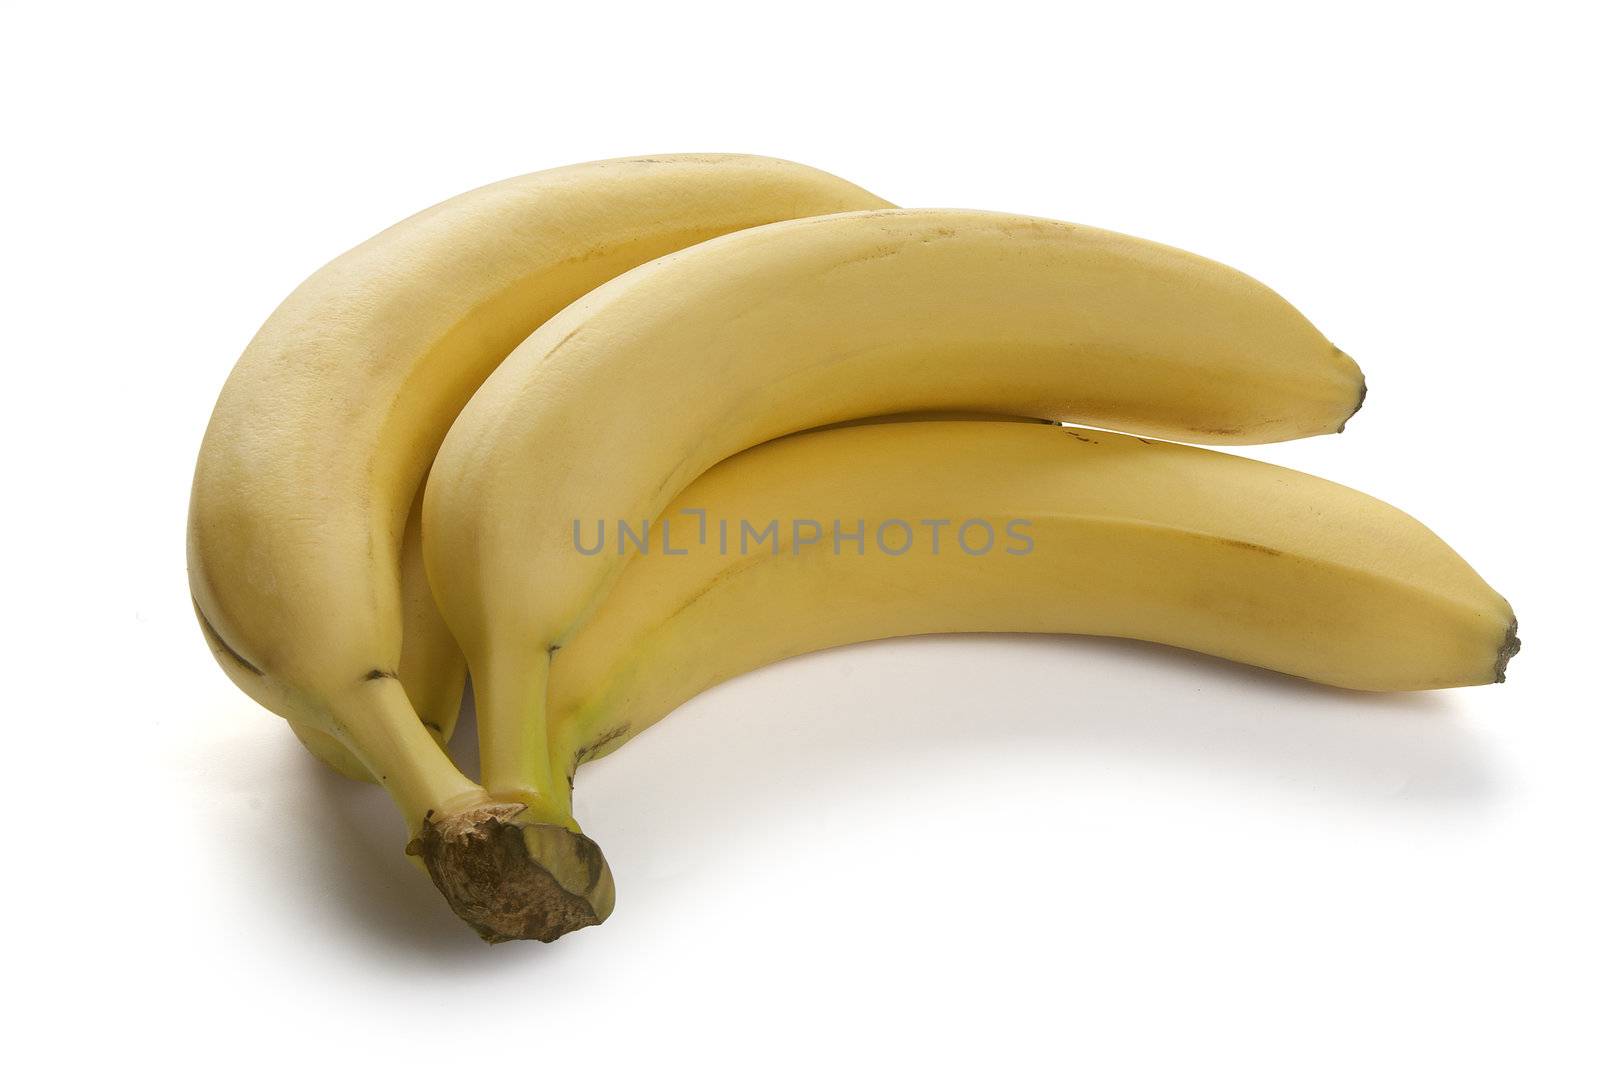 Bunch of fresh yellow bananas on the white background